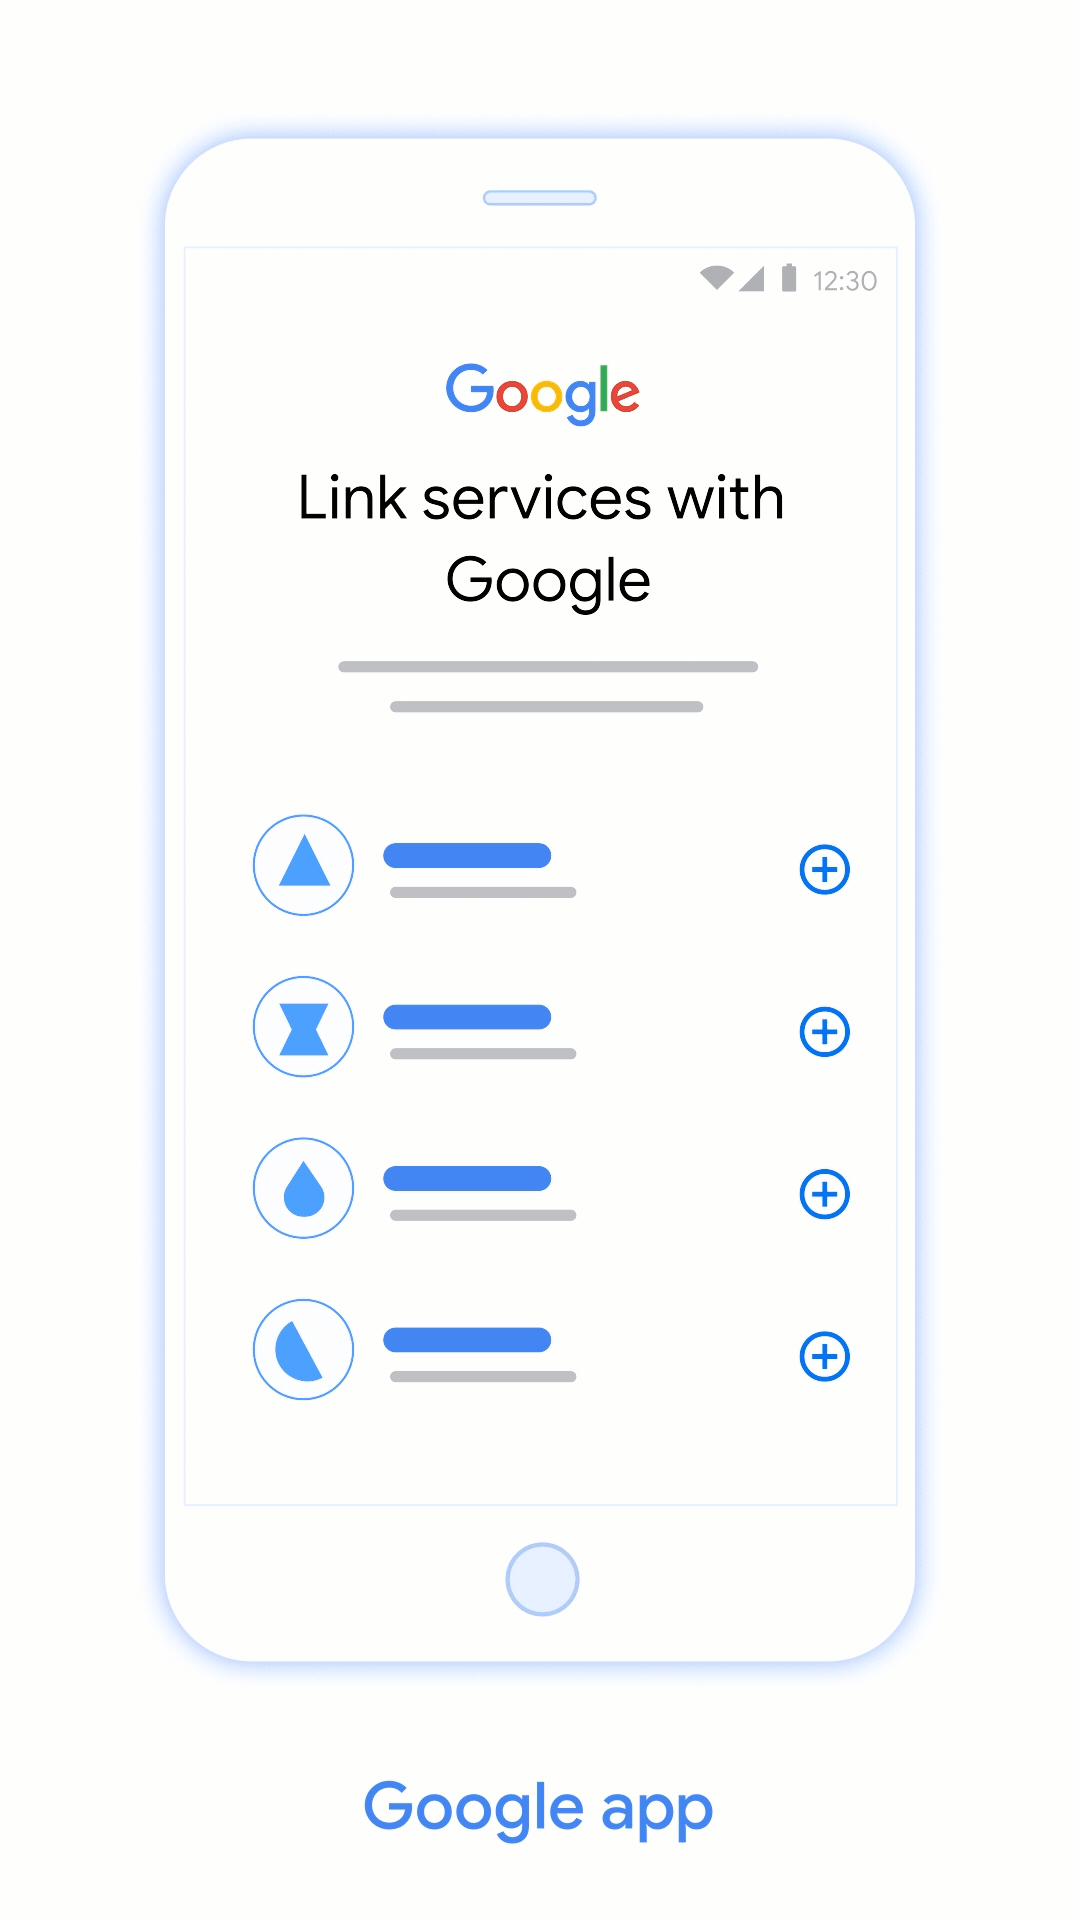 The animated graphic shows the steps you need to take to complete the linking process.  To begin, you will see a consent screen with information about what Google will be able to do after the process is completed. You will then be redirected to the third-party website to log in and consent to sharing your data with Google. If you choose to continue, you will be redirected back to the Google app and the linking process will be completed.